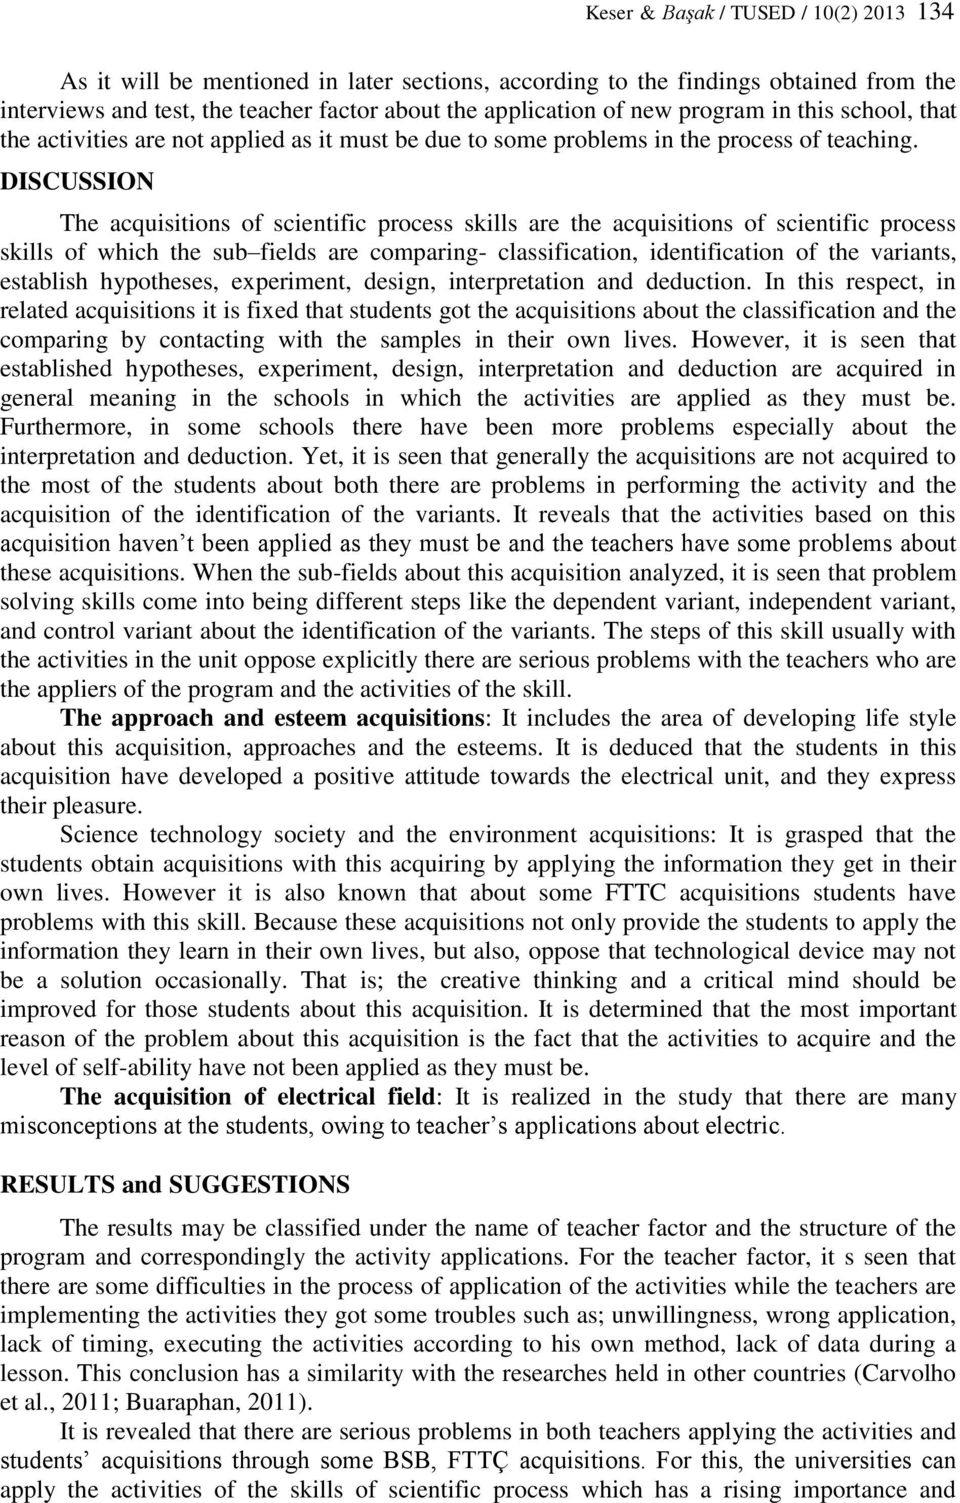 DISCUSSION The acquisitions of scientific process skills are the acquisitions of scientific process skills of which the sub fields are comparing- classification, identification of the variants,